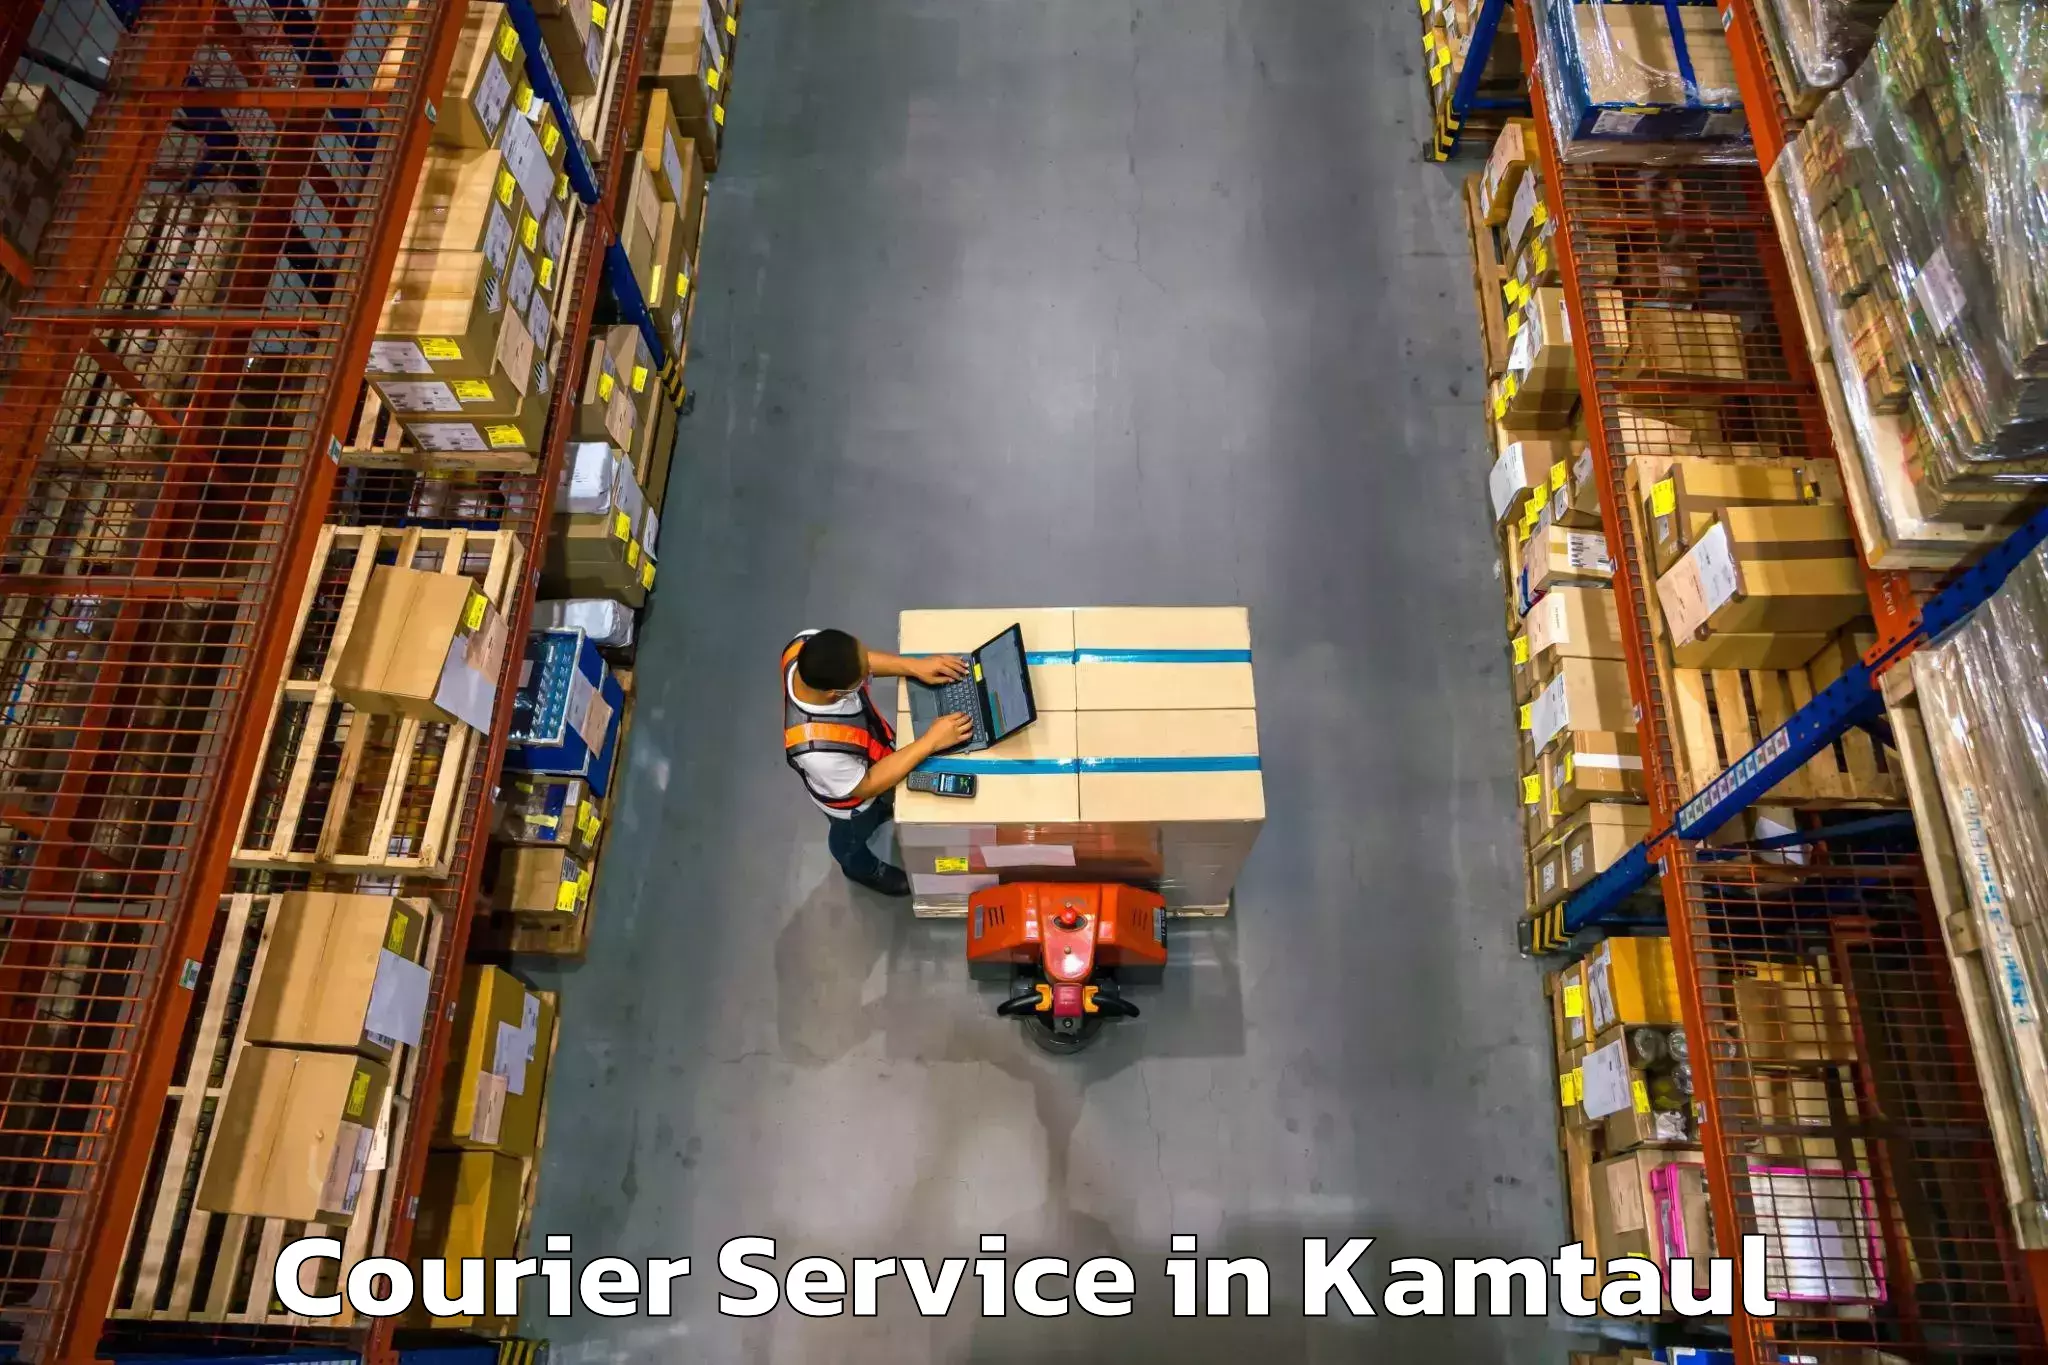 Parcel delivery automation in Kamtaul